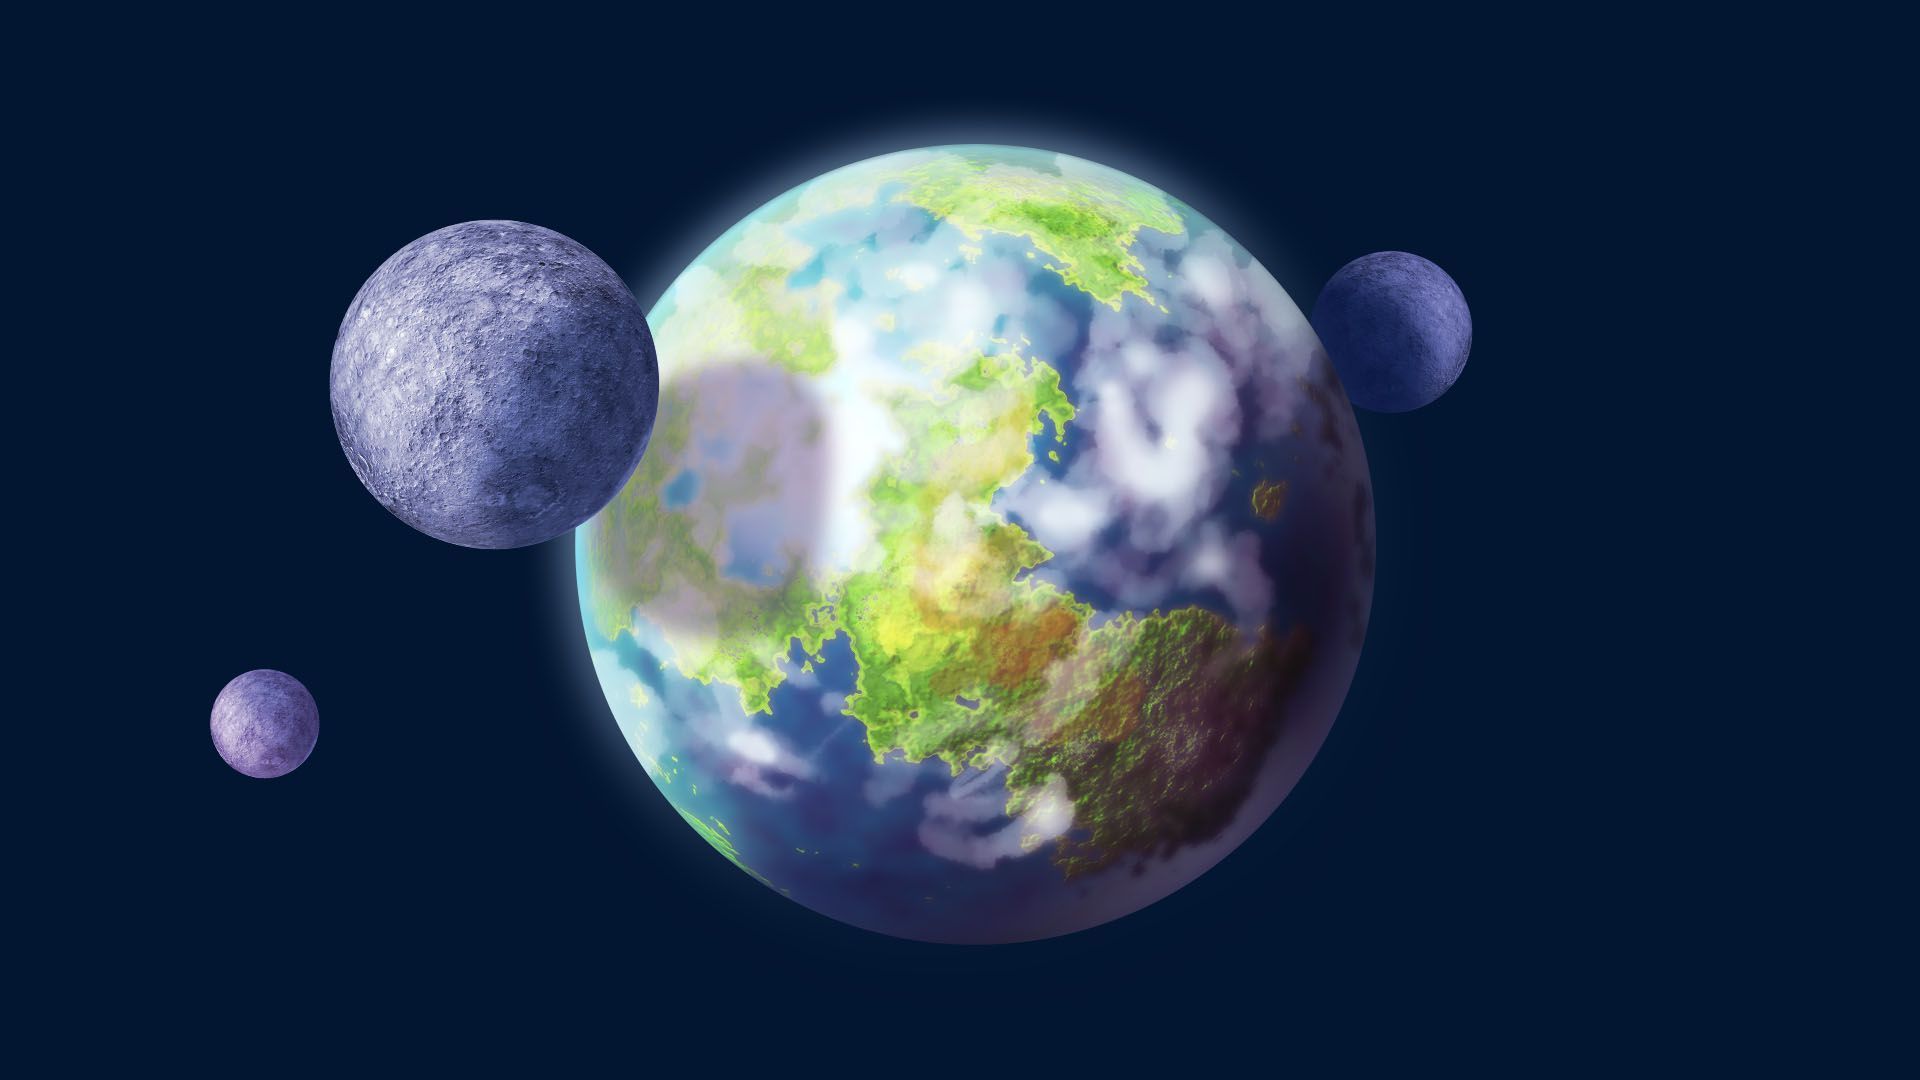 Illustration of an earth-like planet orbited by three moons